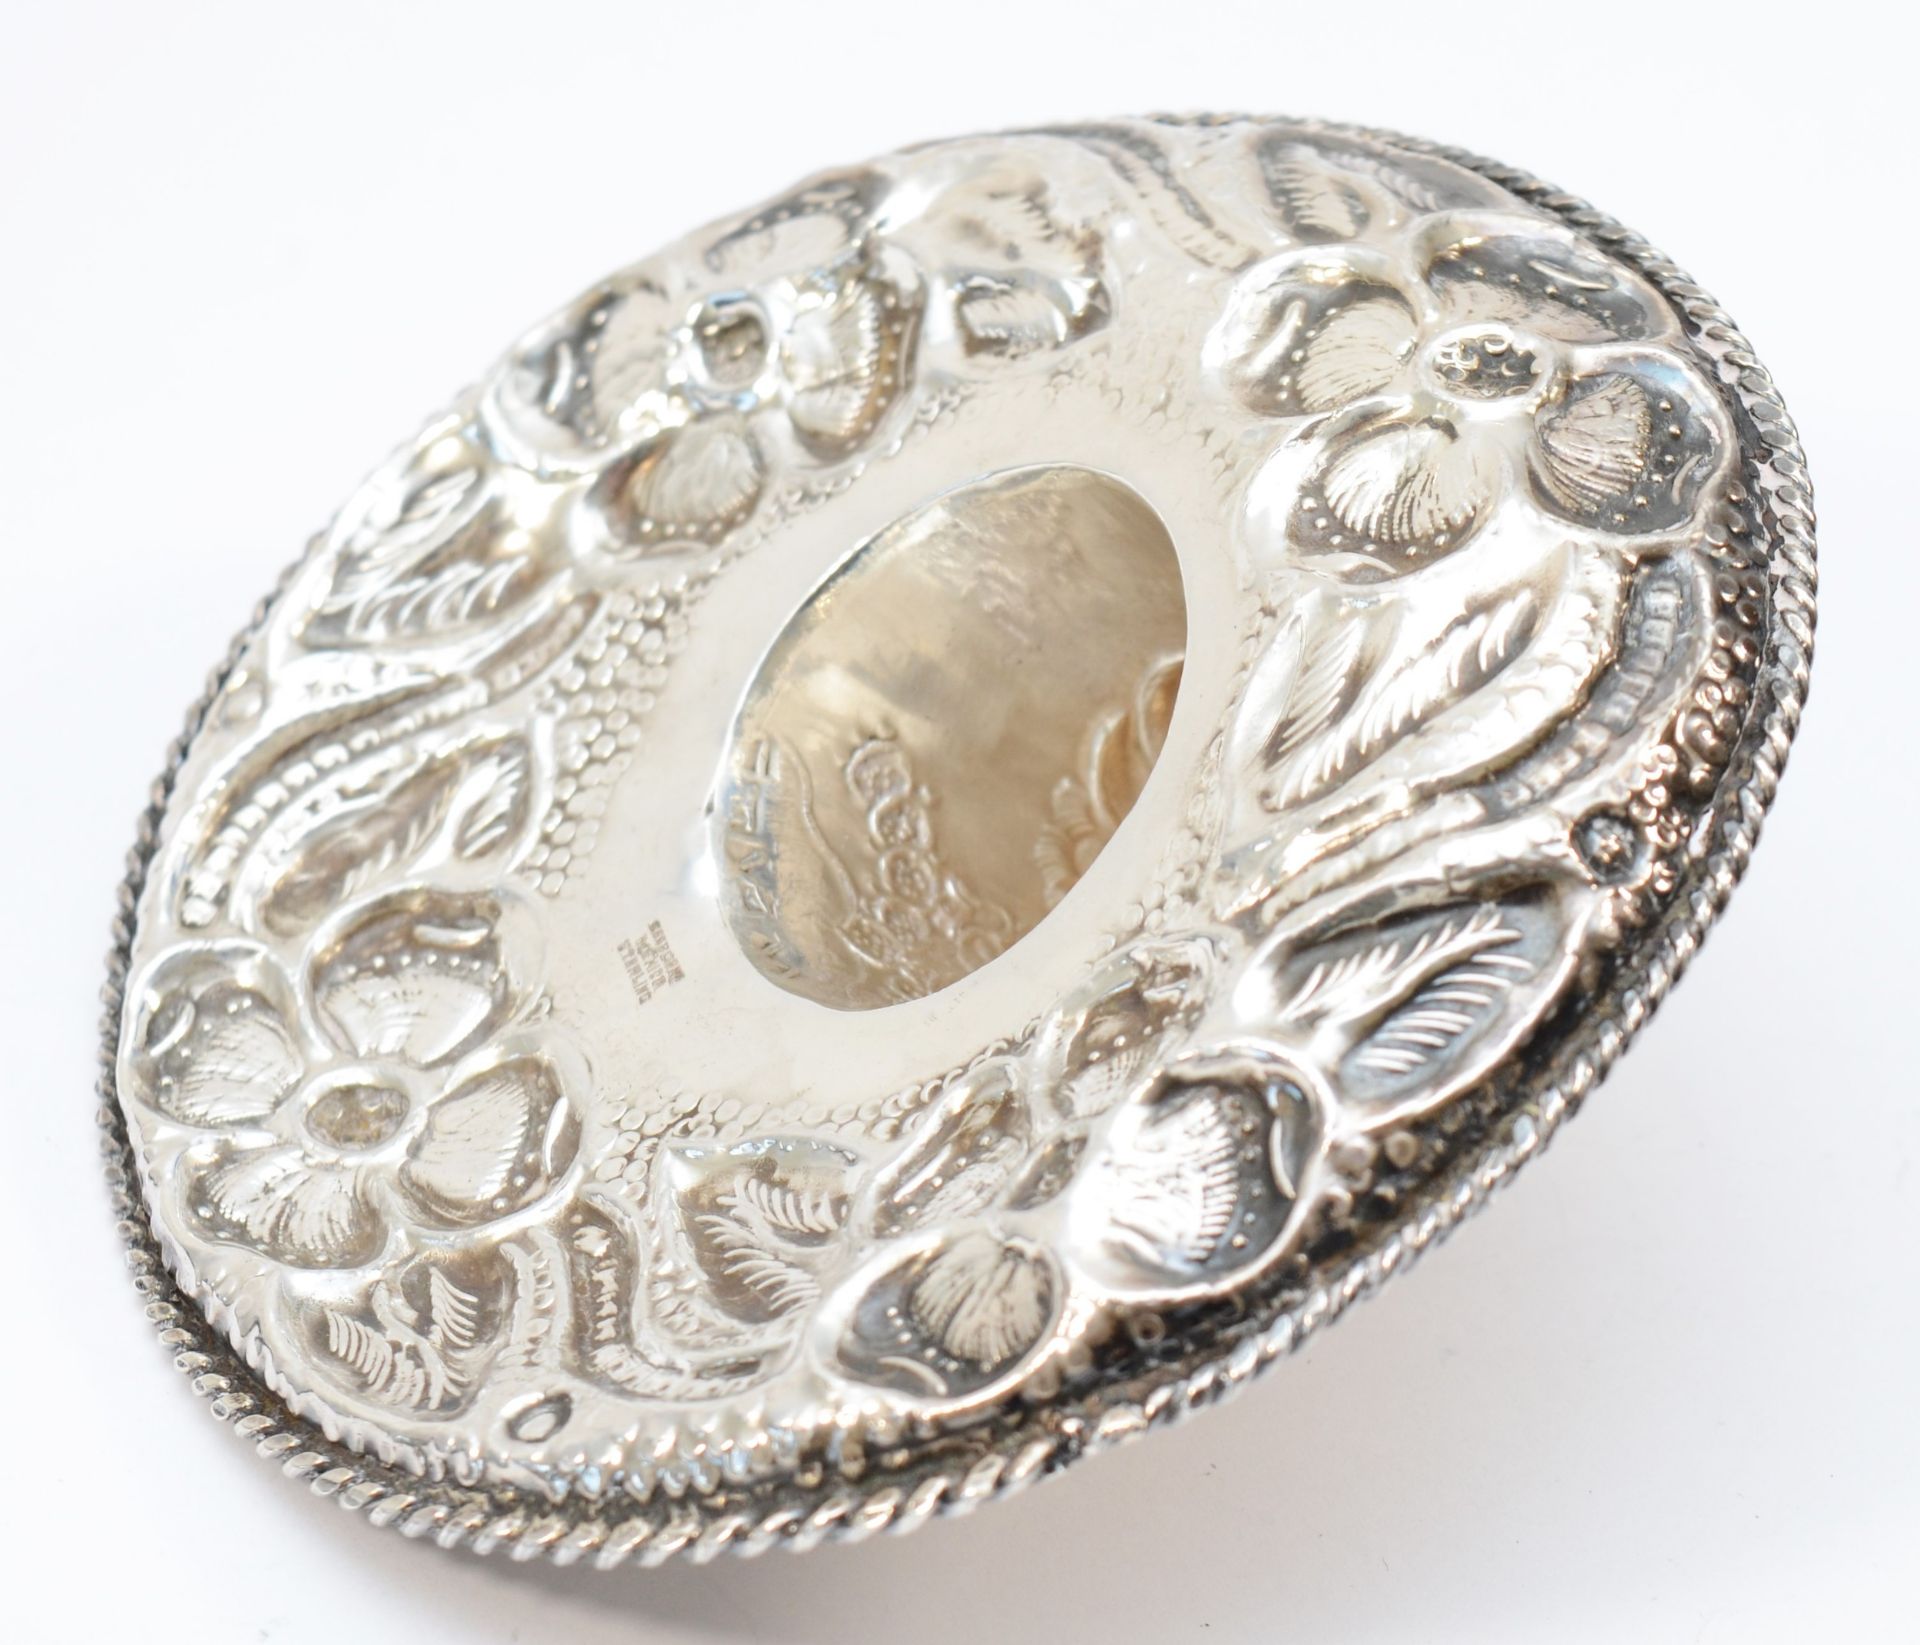 A Mexican Sterling Silver hat, with embossed and chased floral decoration, diameter 13cm, 91gms - Image 3 of 3